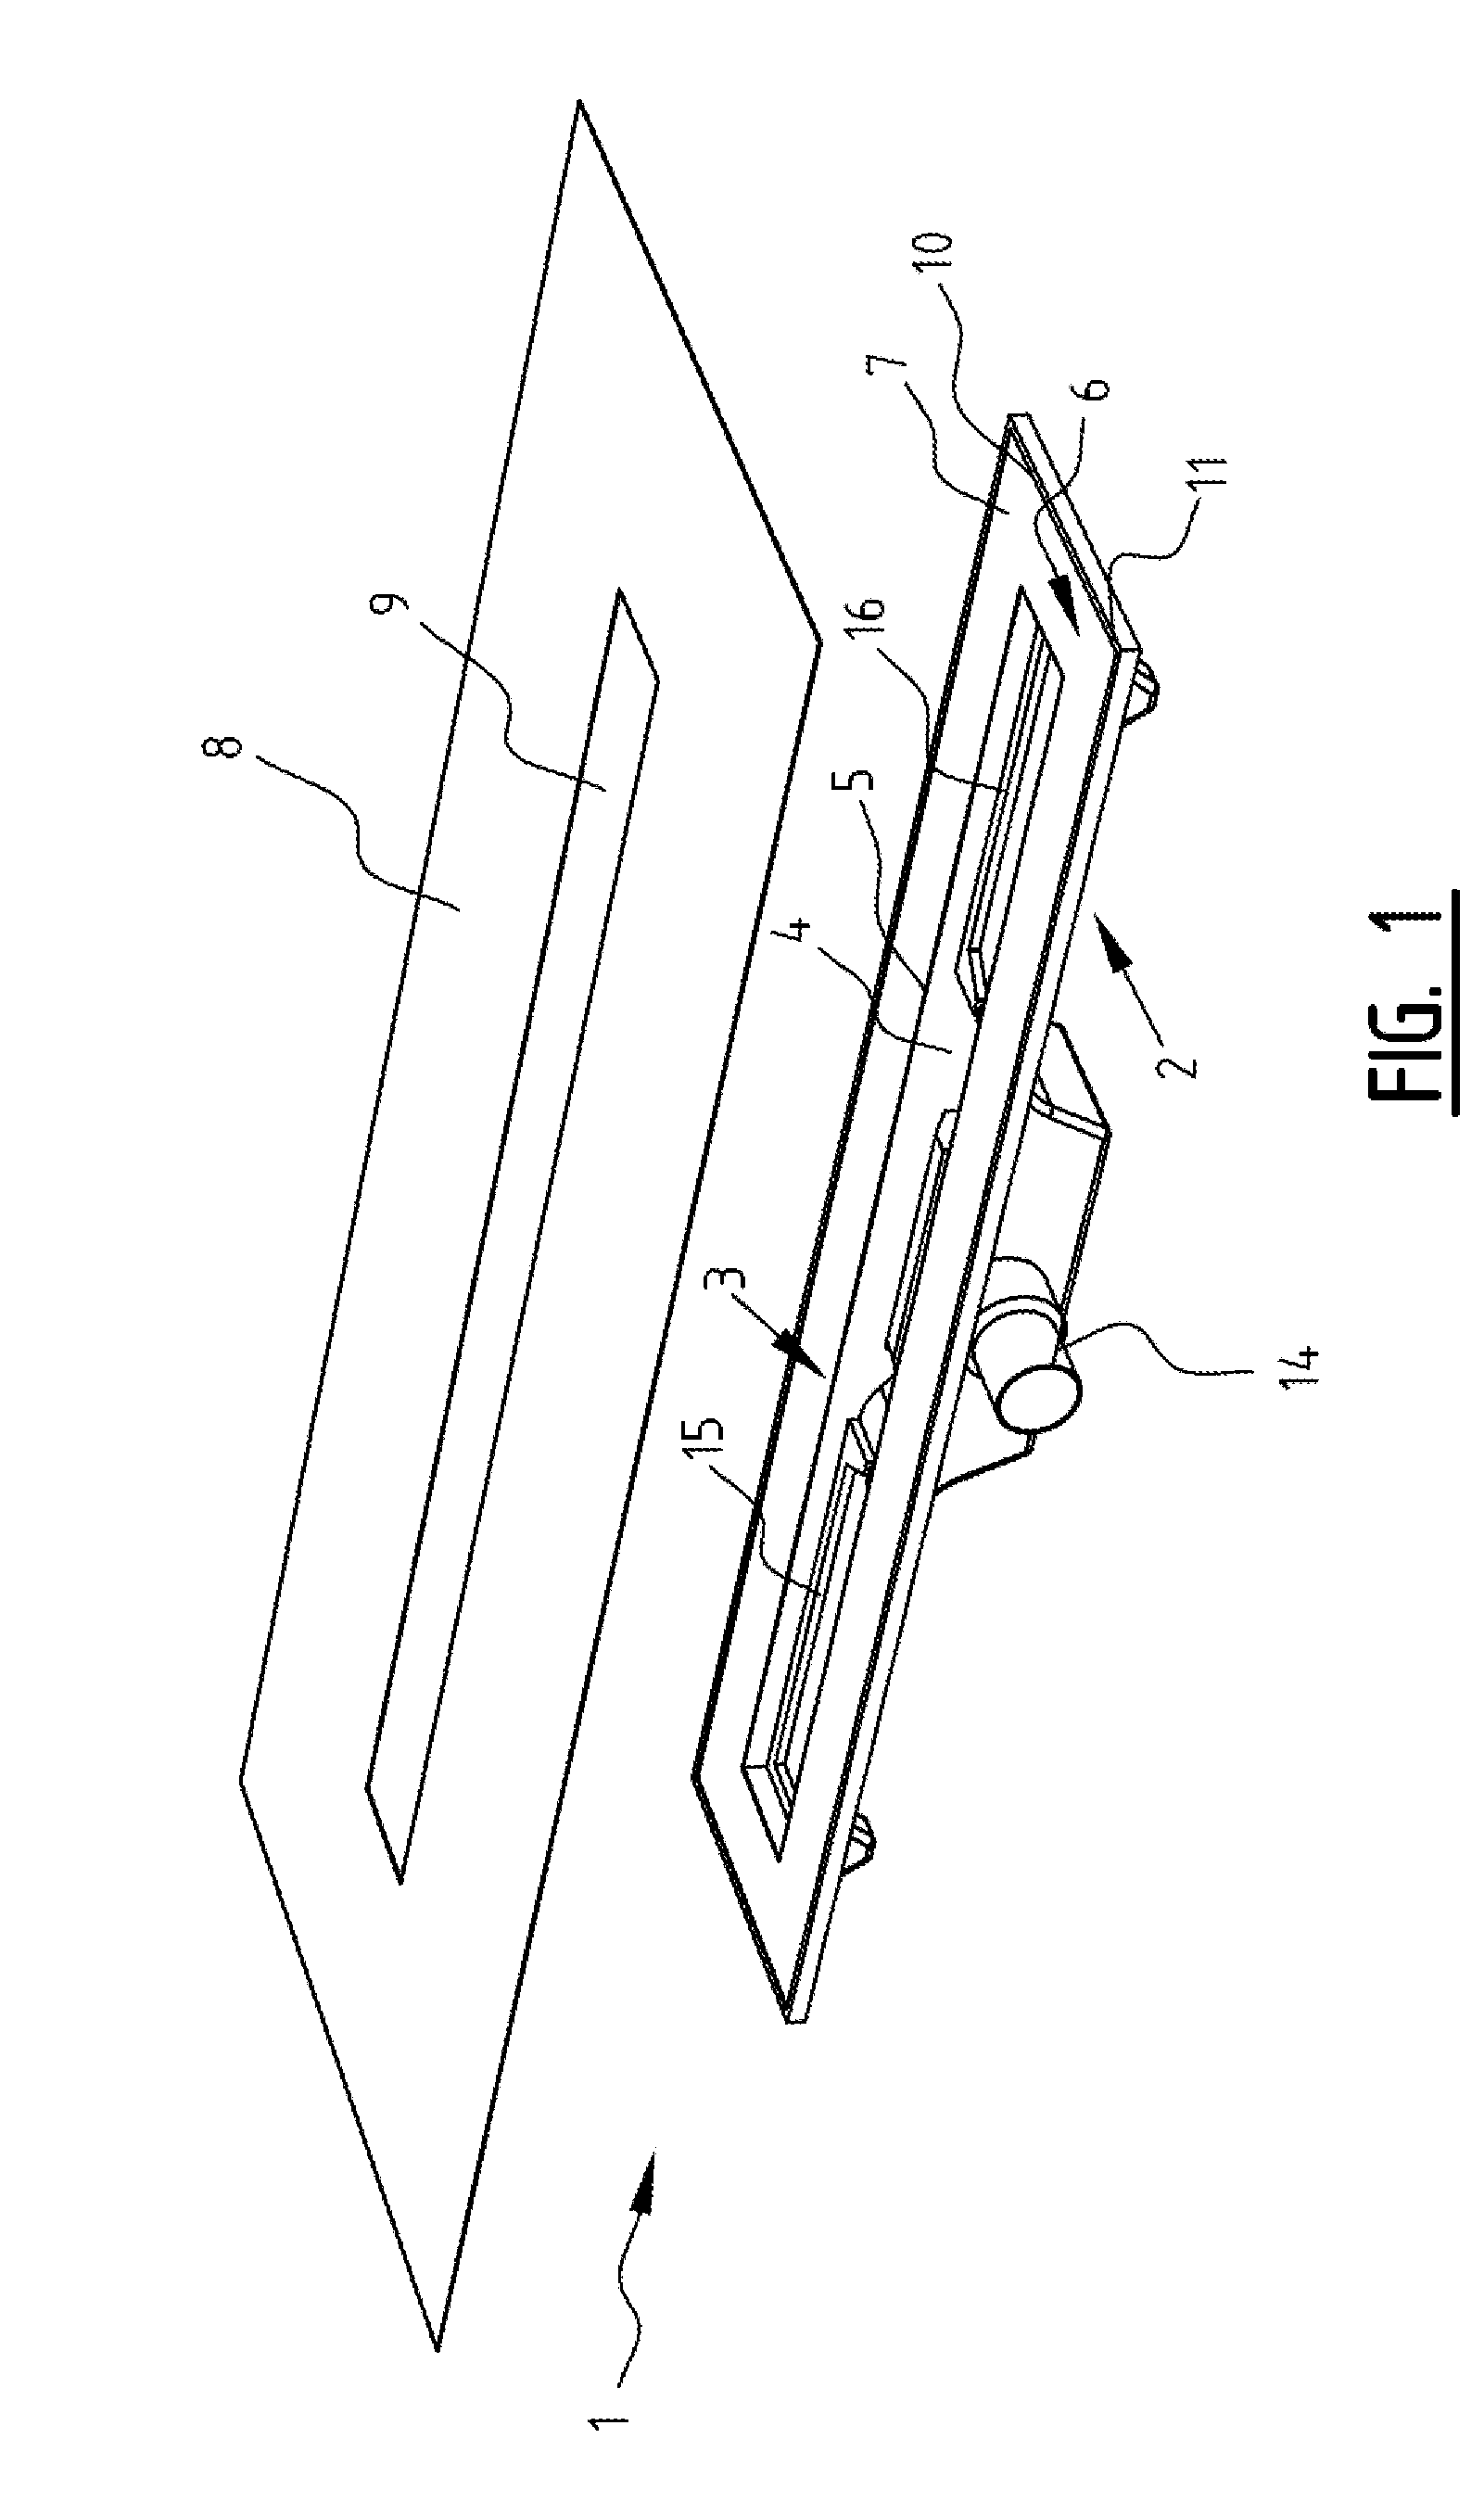 Drain assembly, drain body for use in such an assembly and method for building-in of a drain